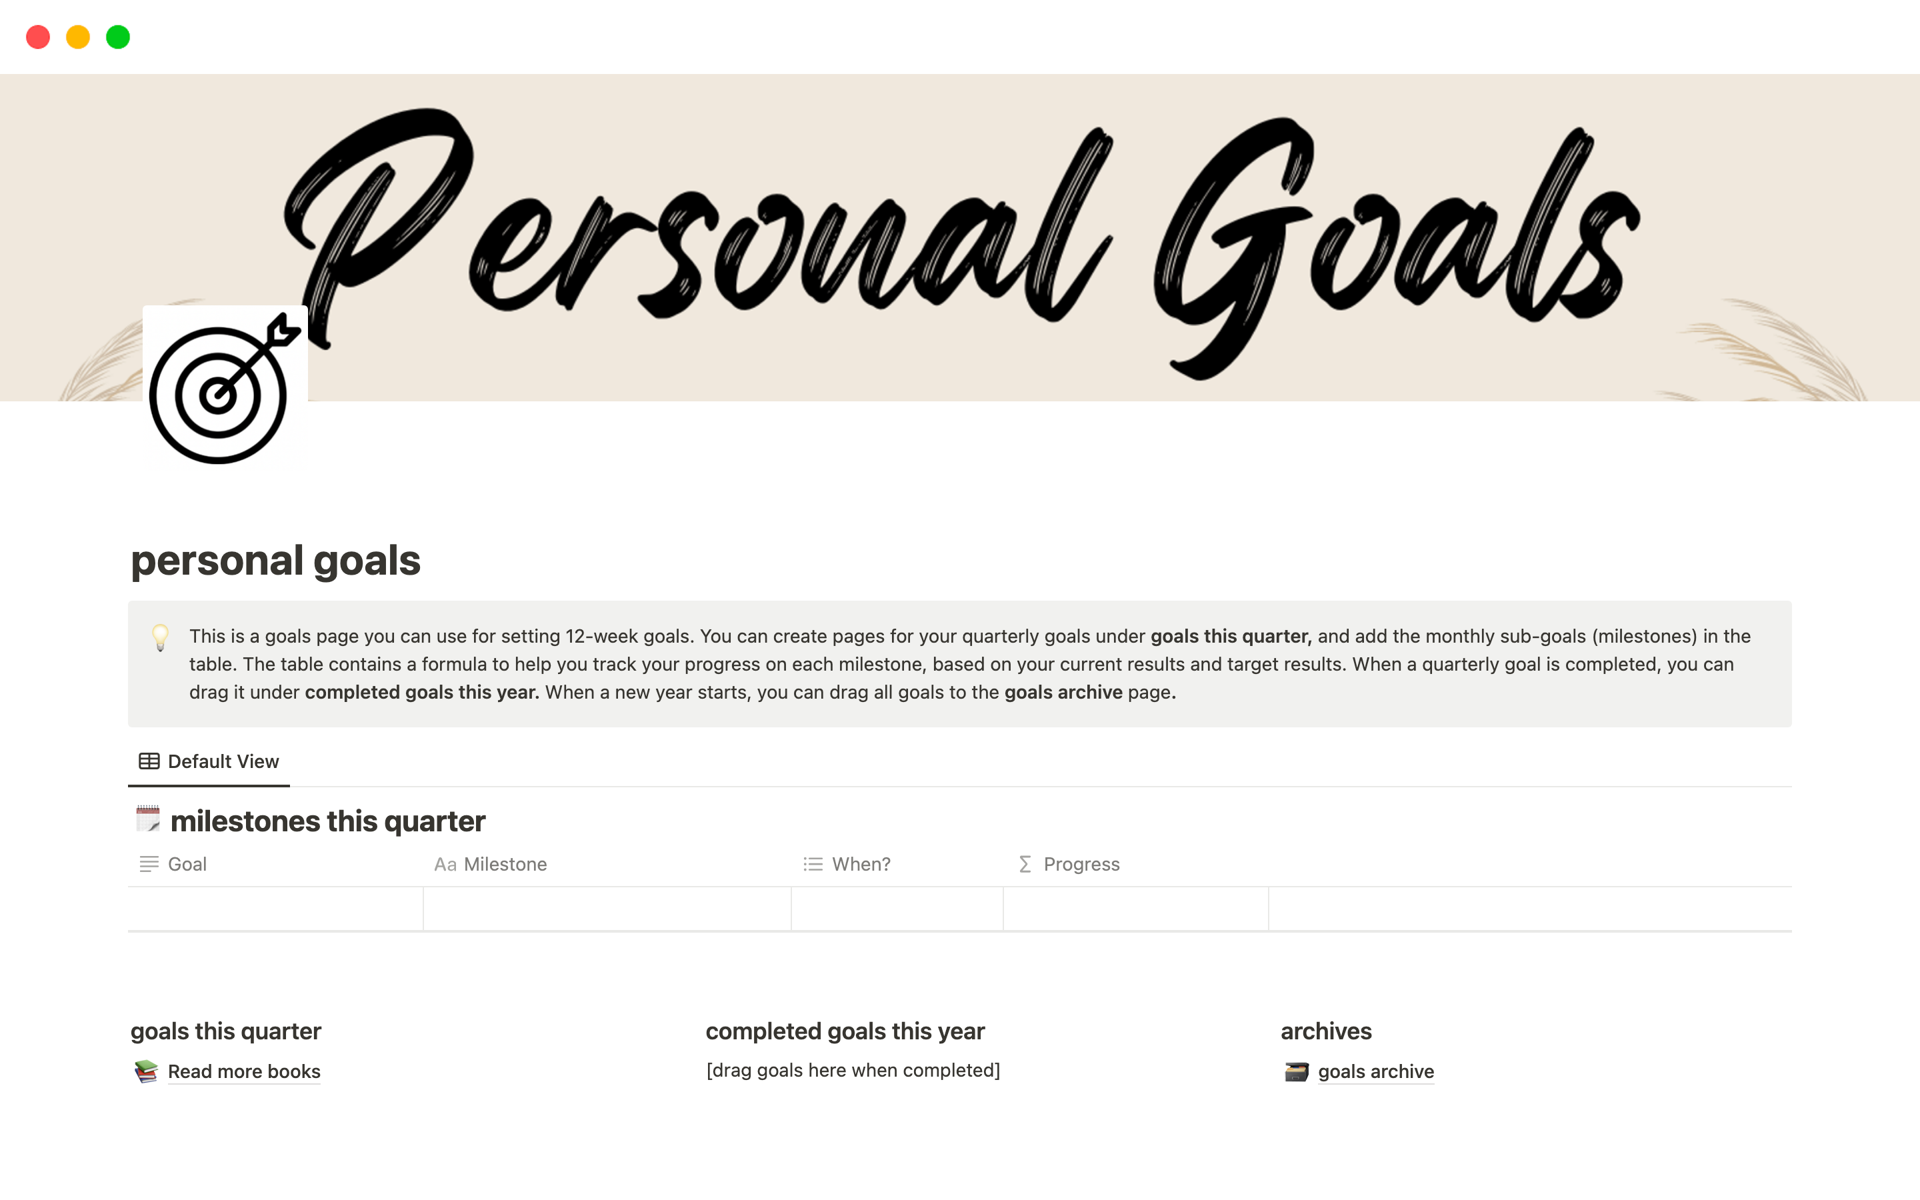 Helping you keep track of your personal goals through out the year